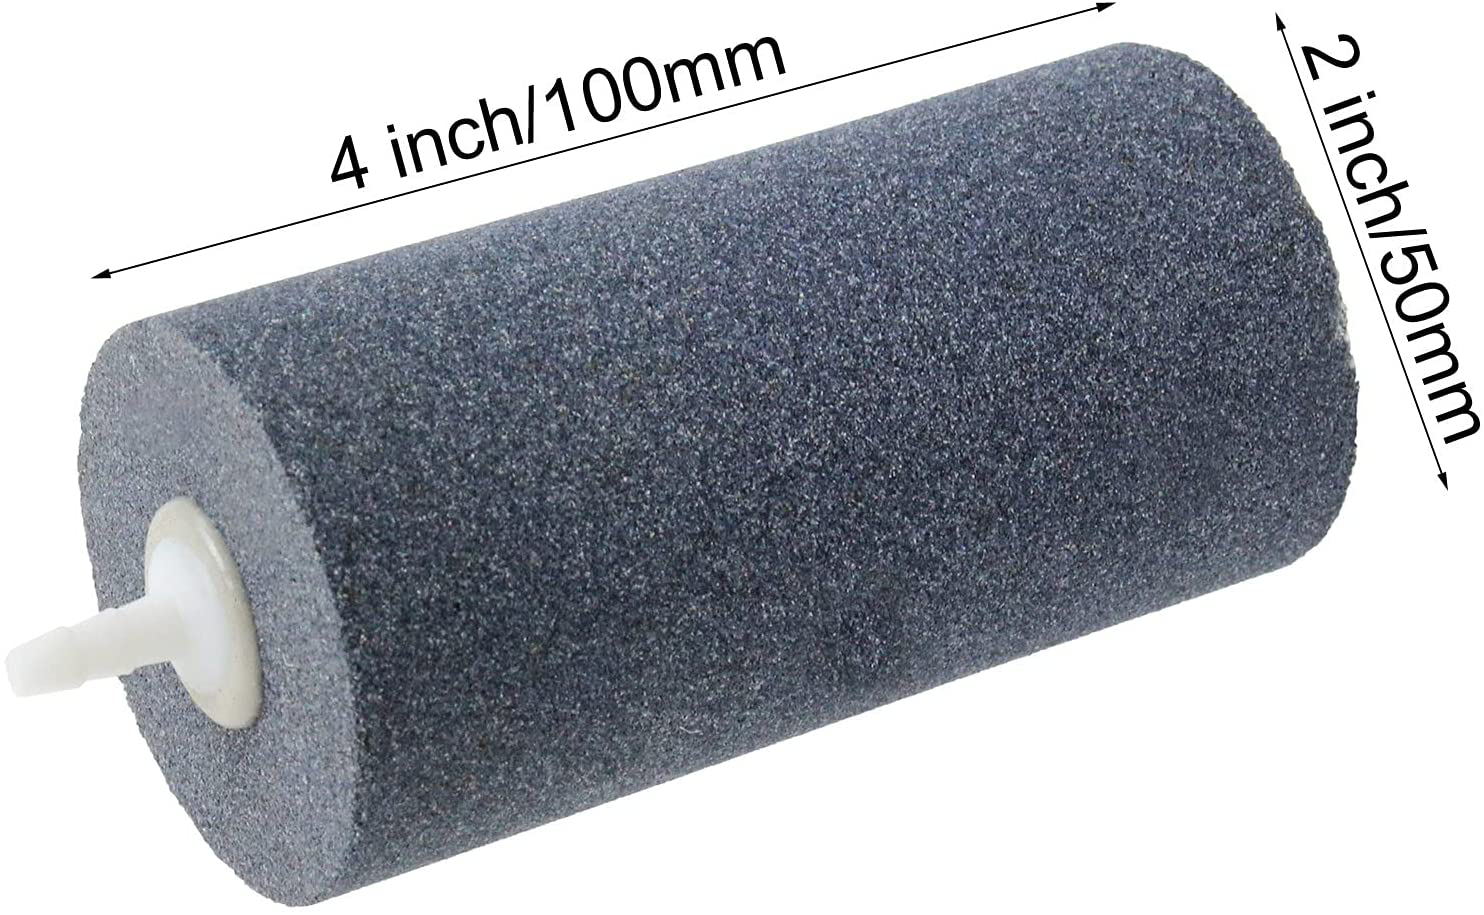 AQUANEAT Air Stone, 4 X 2 Inch Large Air Stone Cylinder, Aerator Bubble Diffuser, Air Pump Accessories for Hydroponic Growing System, Pond Circulation, Aquarium Fish Tank (10 Pack) Animals & Pet Supplies > Pet Supplies > Fish Supplies > Aquarium Air Stones & Diffusers AQUANEAT   